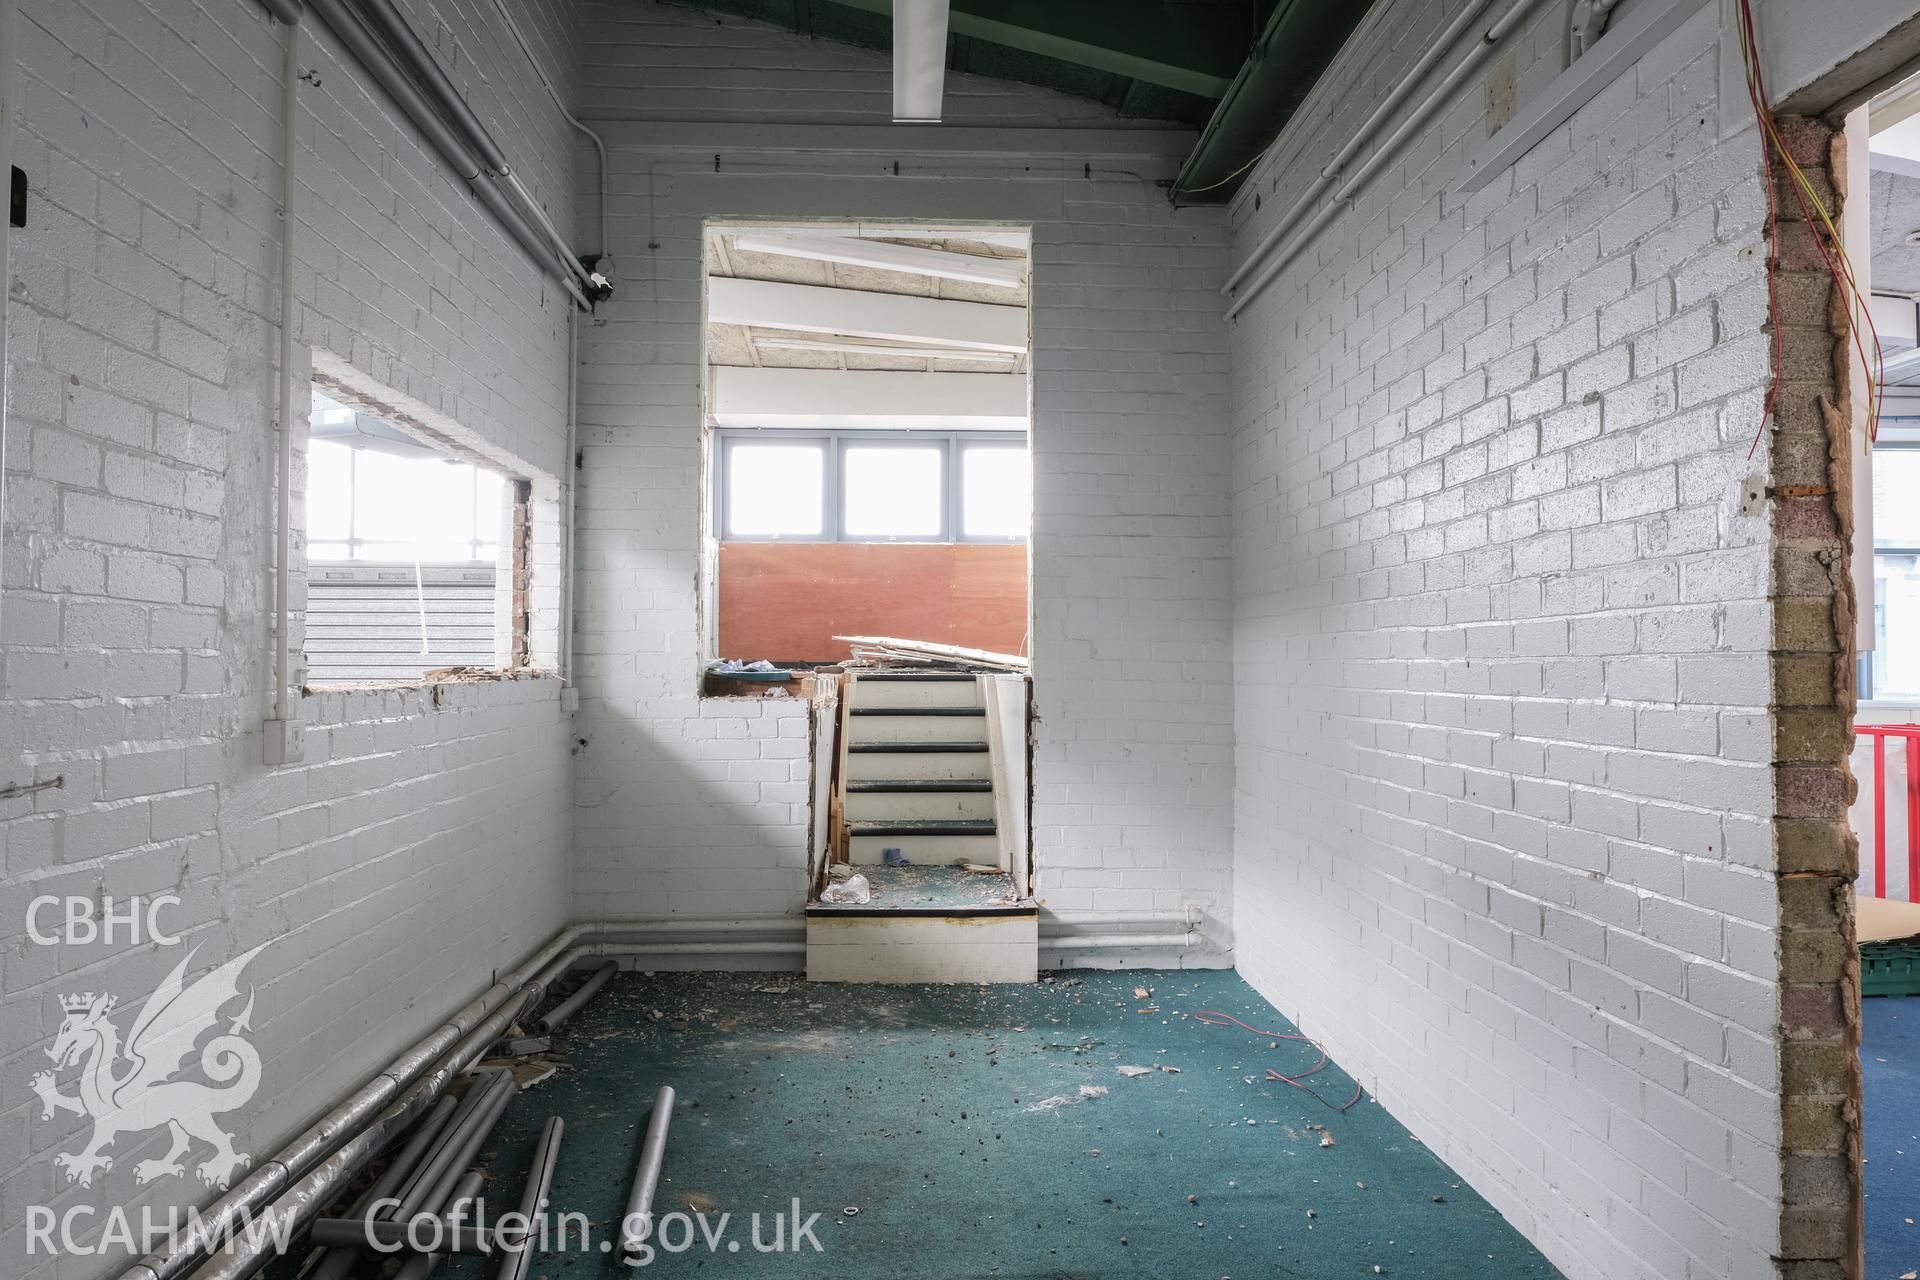 Digital colour photograph showing detailed interior view of room at Caernarfonshire Technical College, Ffriddoedd Road, Bangor. Photographed by Dilys Morgan and donated by Wyn Thomas of Grwp Llandrillo-Menai Further Education College, 2019.